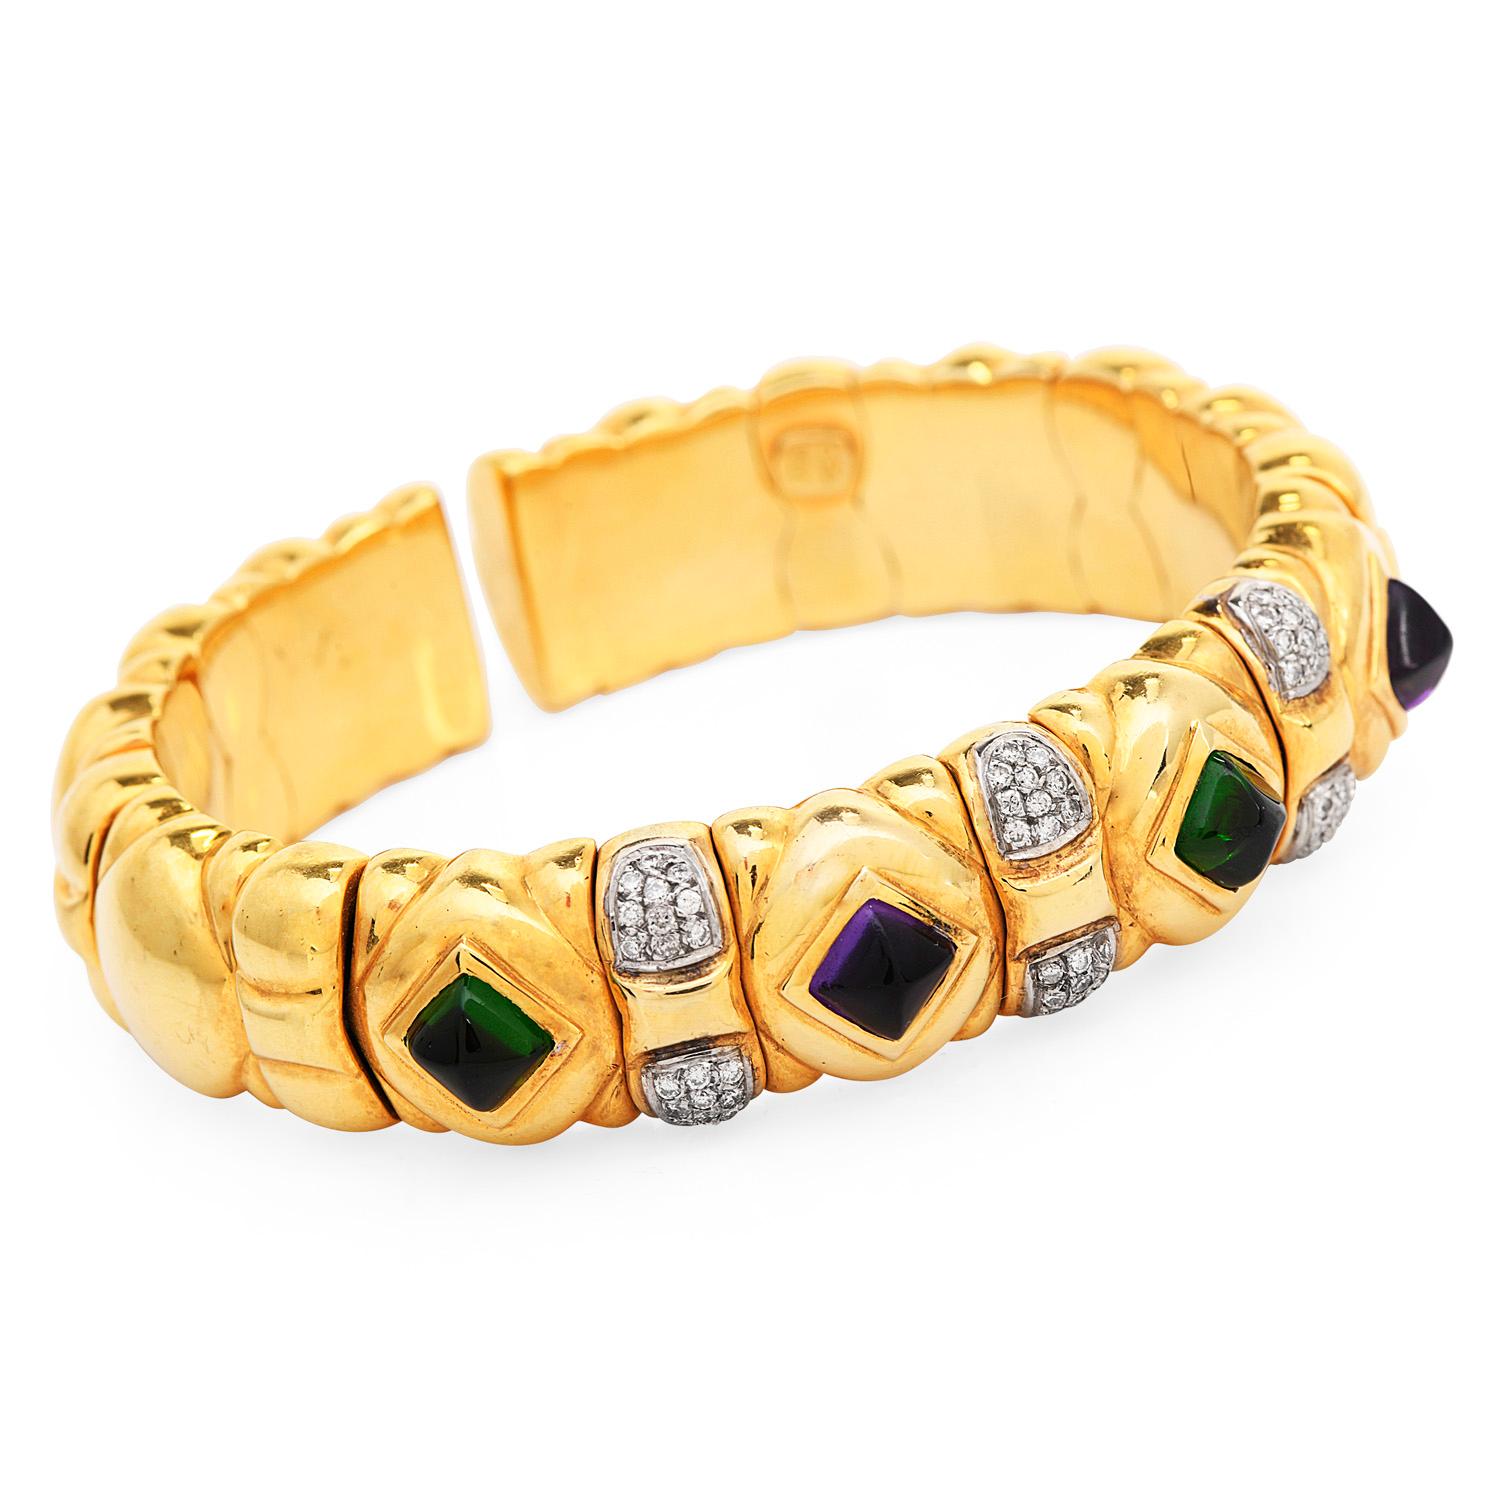 This chic statement Italian bracelet circa1980 is crafted in 18-karat yellow gold, weighing 85.0  grams and measuring approx. 7 inches around the wrist x 14mm wide.

Showcasing 60 fancy  Sugarloaf Cabochon amethyst and peridot bezel-set collectively